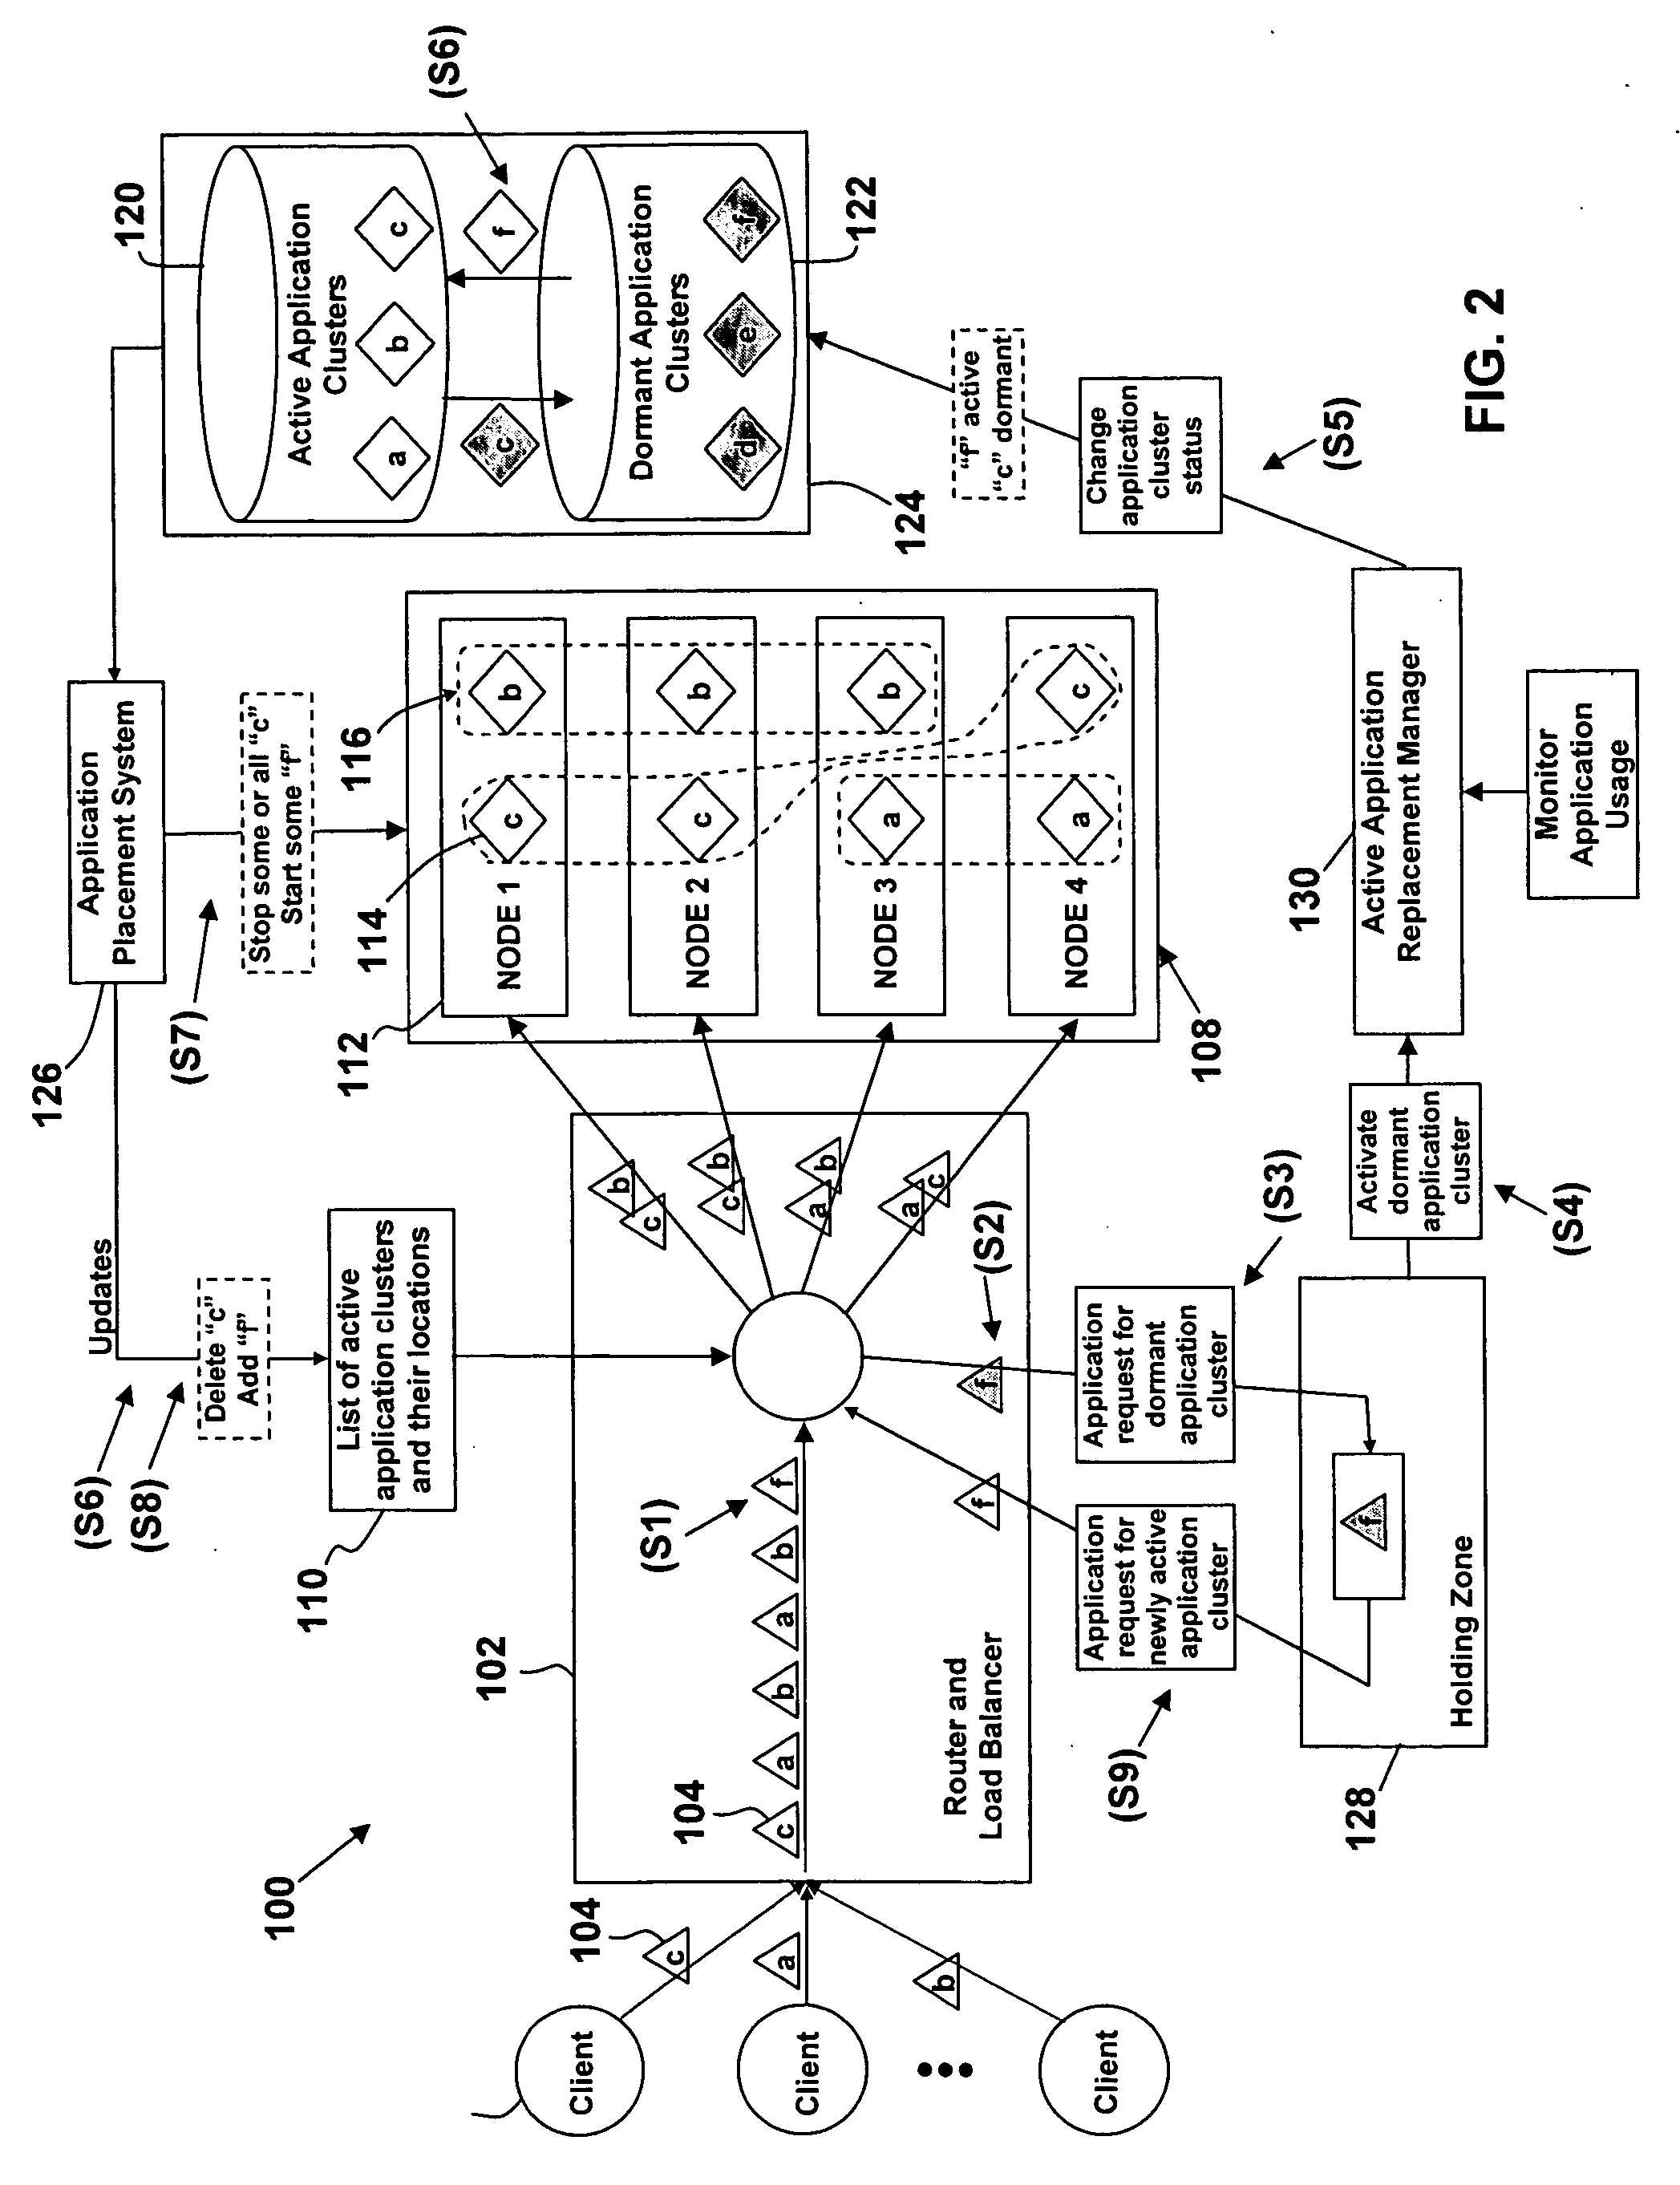 Method, system, and computer program product for supporting a large number of intermittently used application clusters